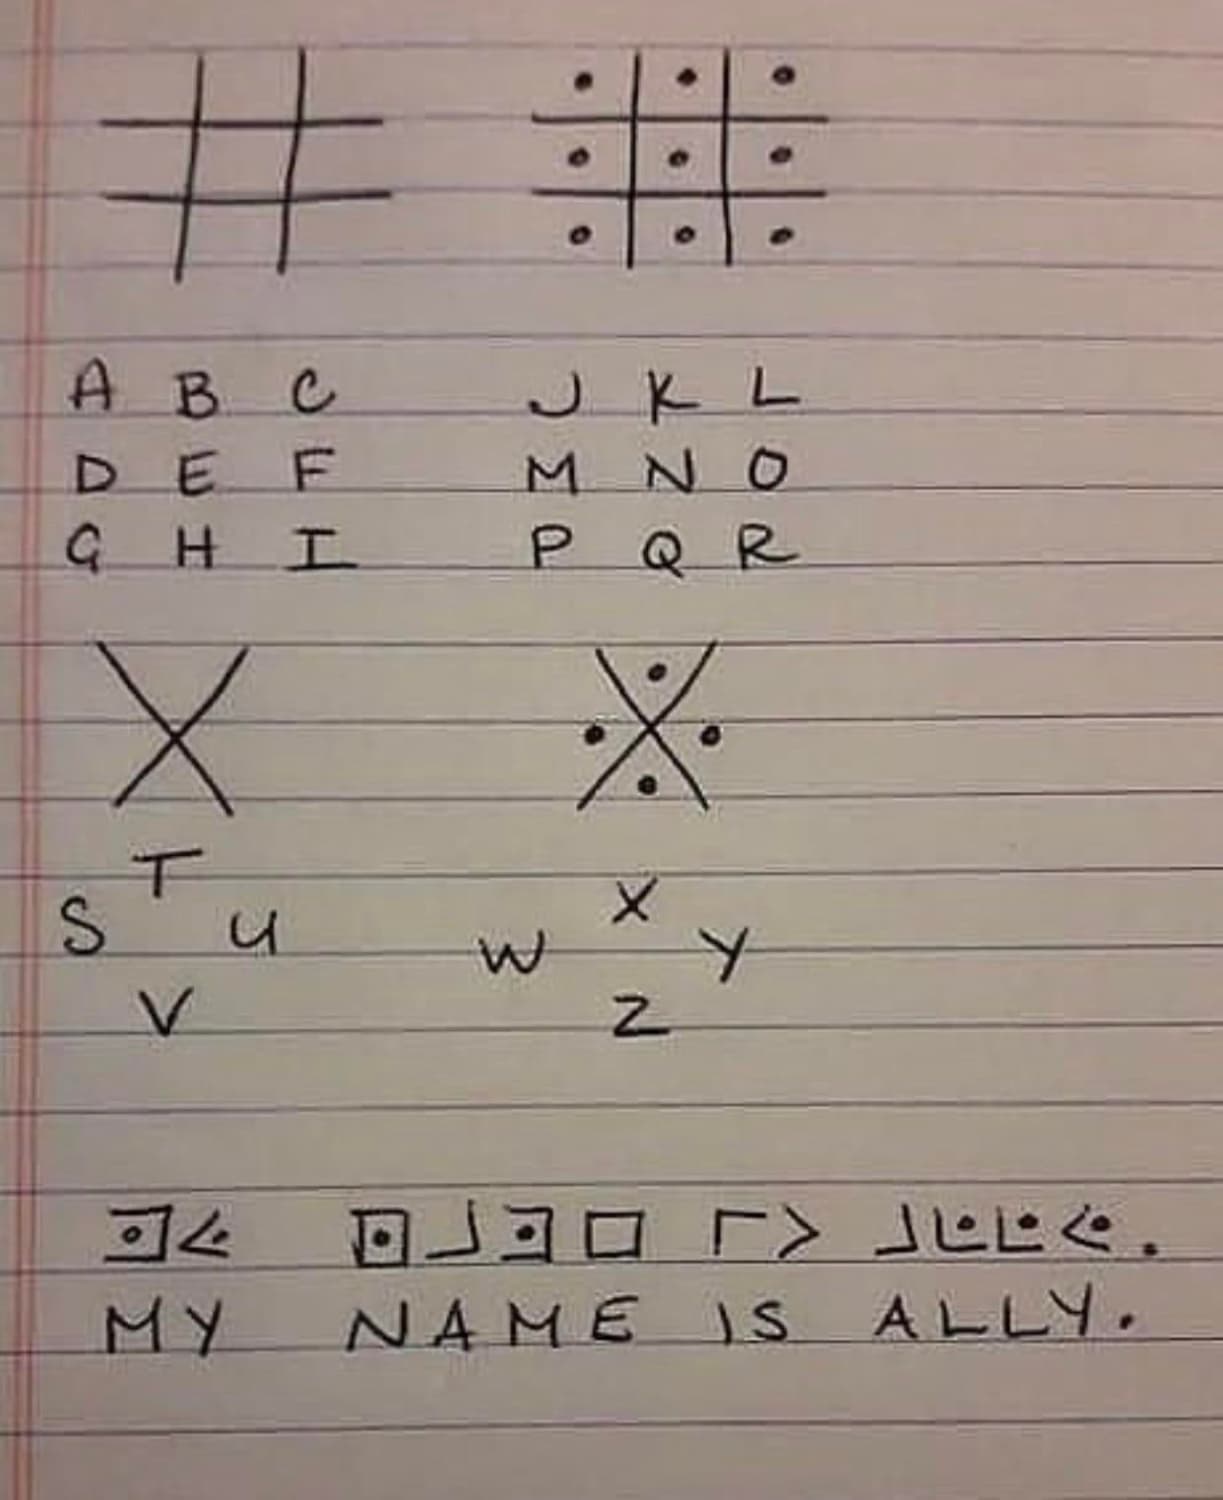 How to read pigpen ciphers